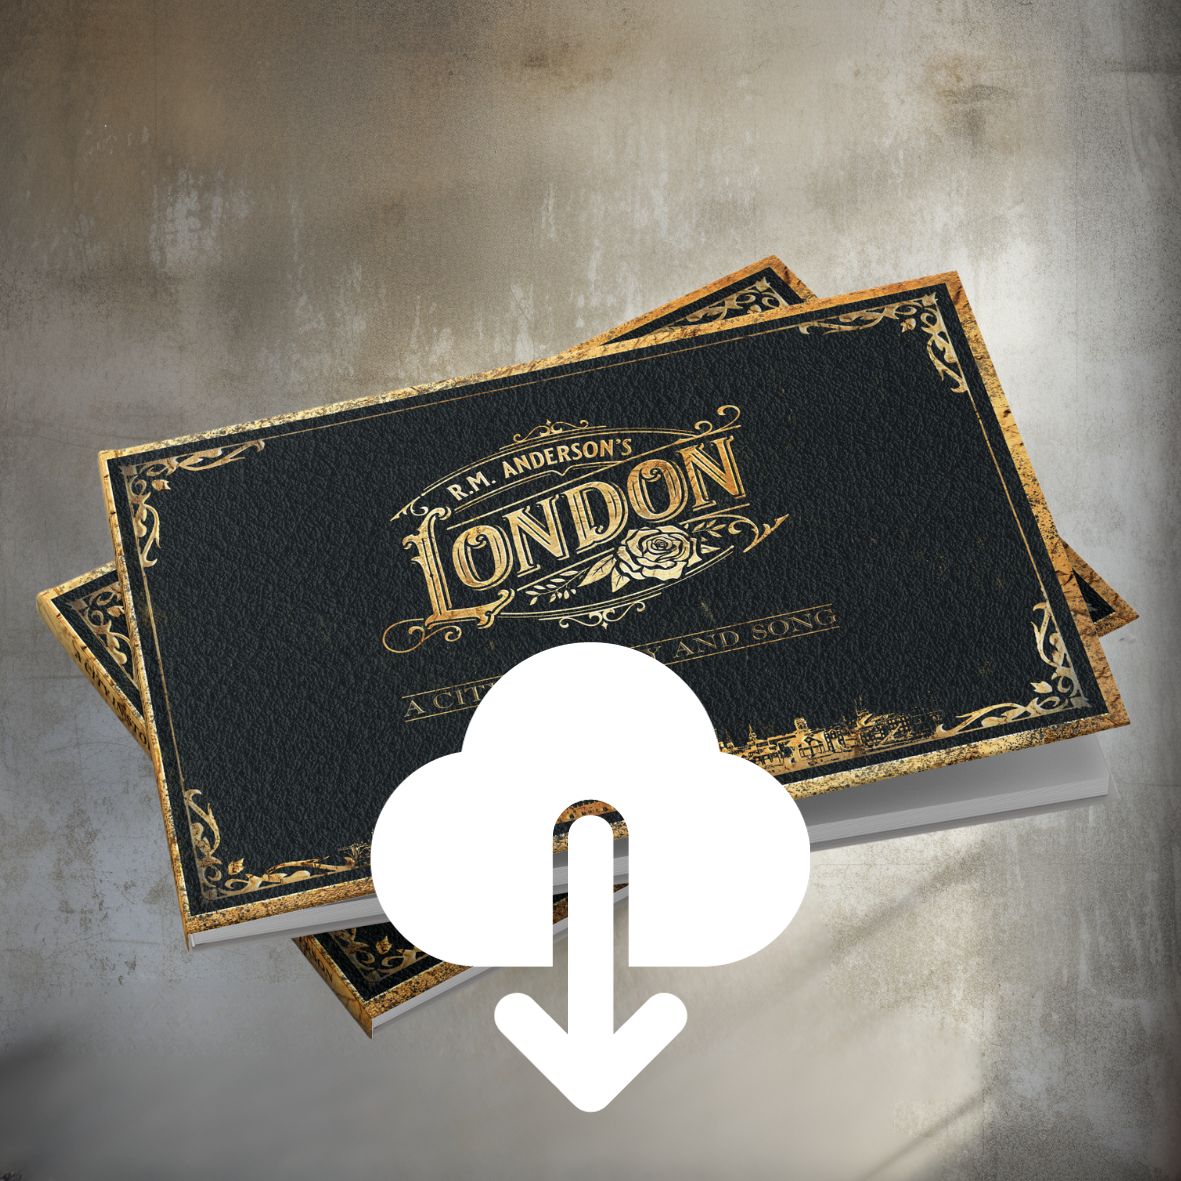 'R.M. Anderson's London' *Signed* CD Gift Box (includes CD, Audiobook and Mp3 Downloads)